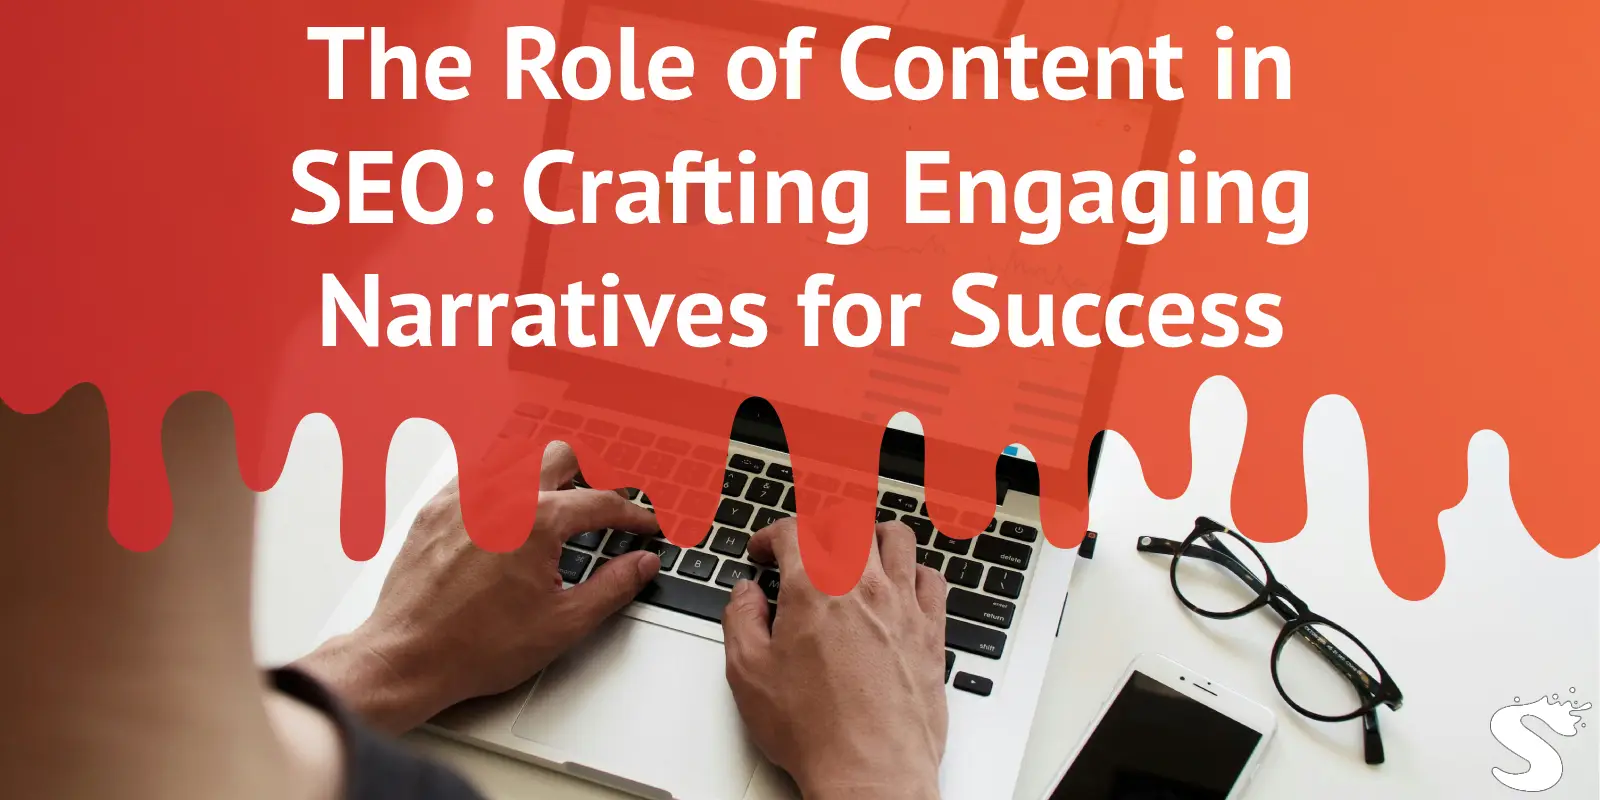 The Role of Content in SEO: Crafting Engaging Narratives for Success